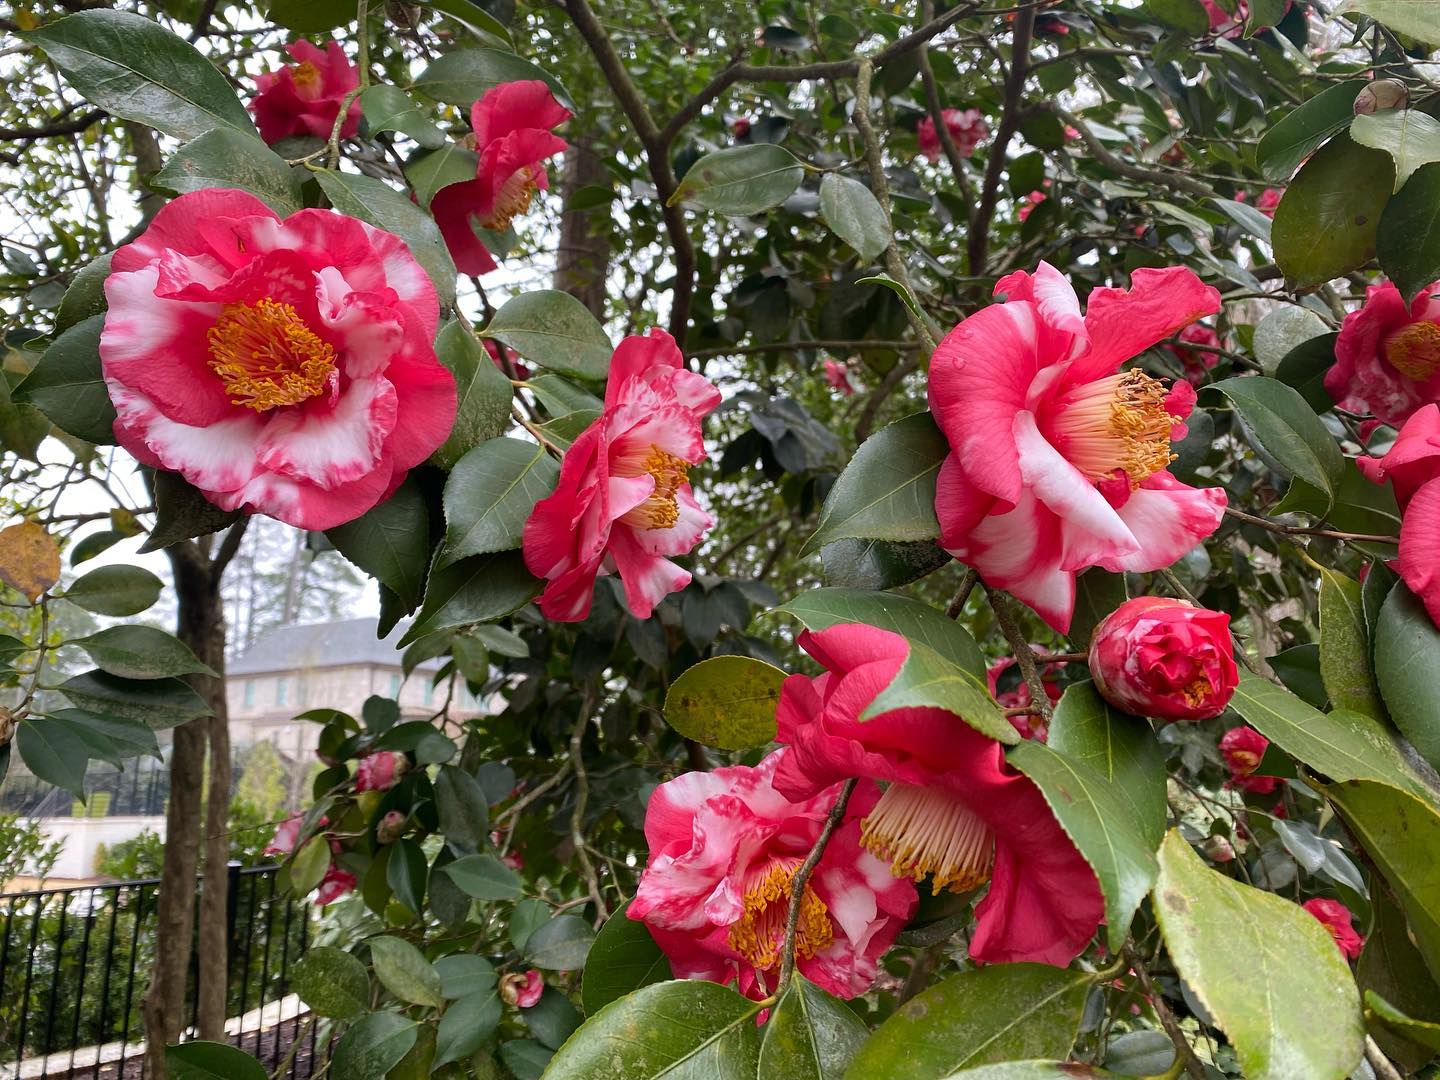 This ‘Governor Mouton’ Camellia is currently blooming in a Raleigh yard.